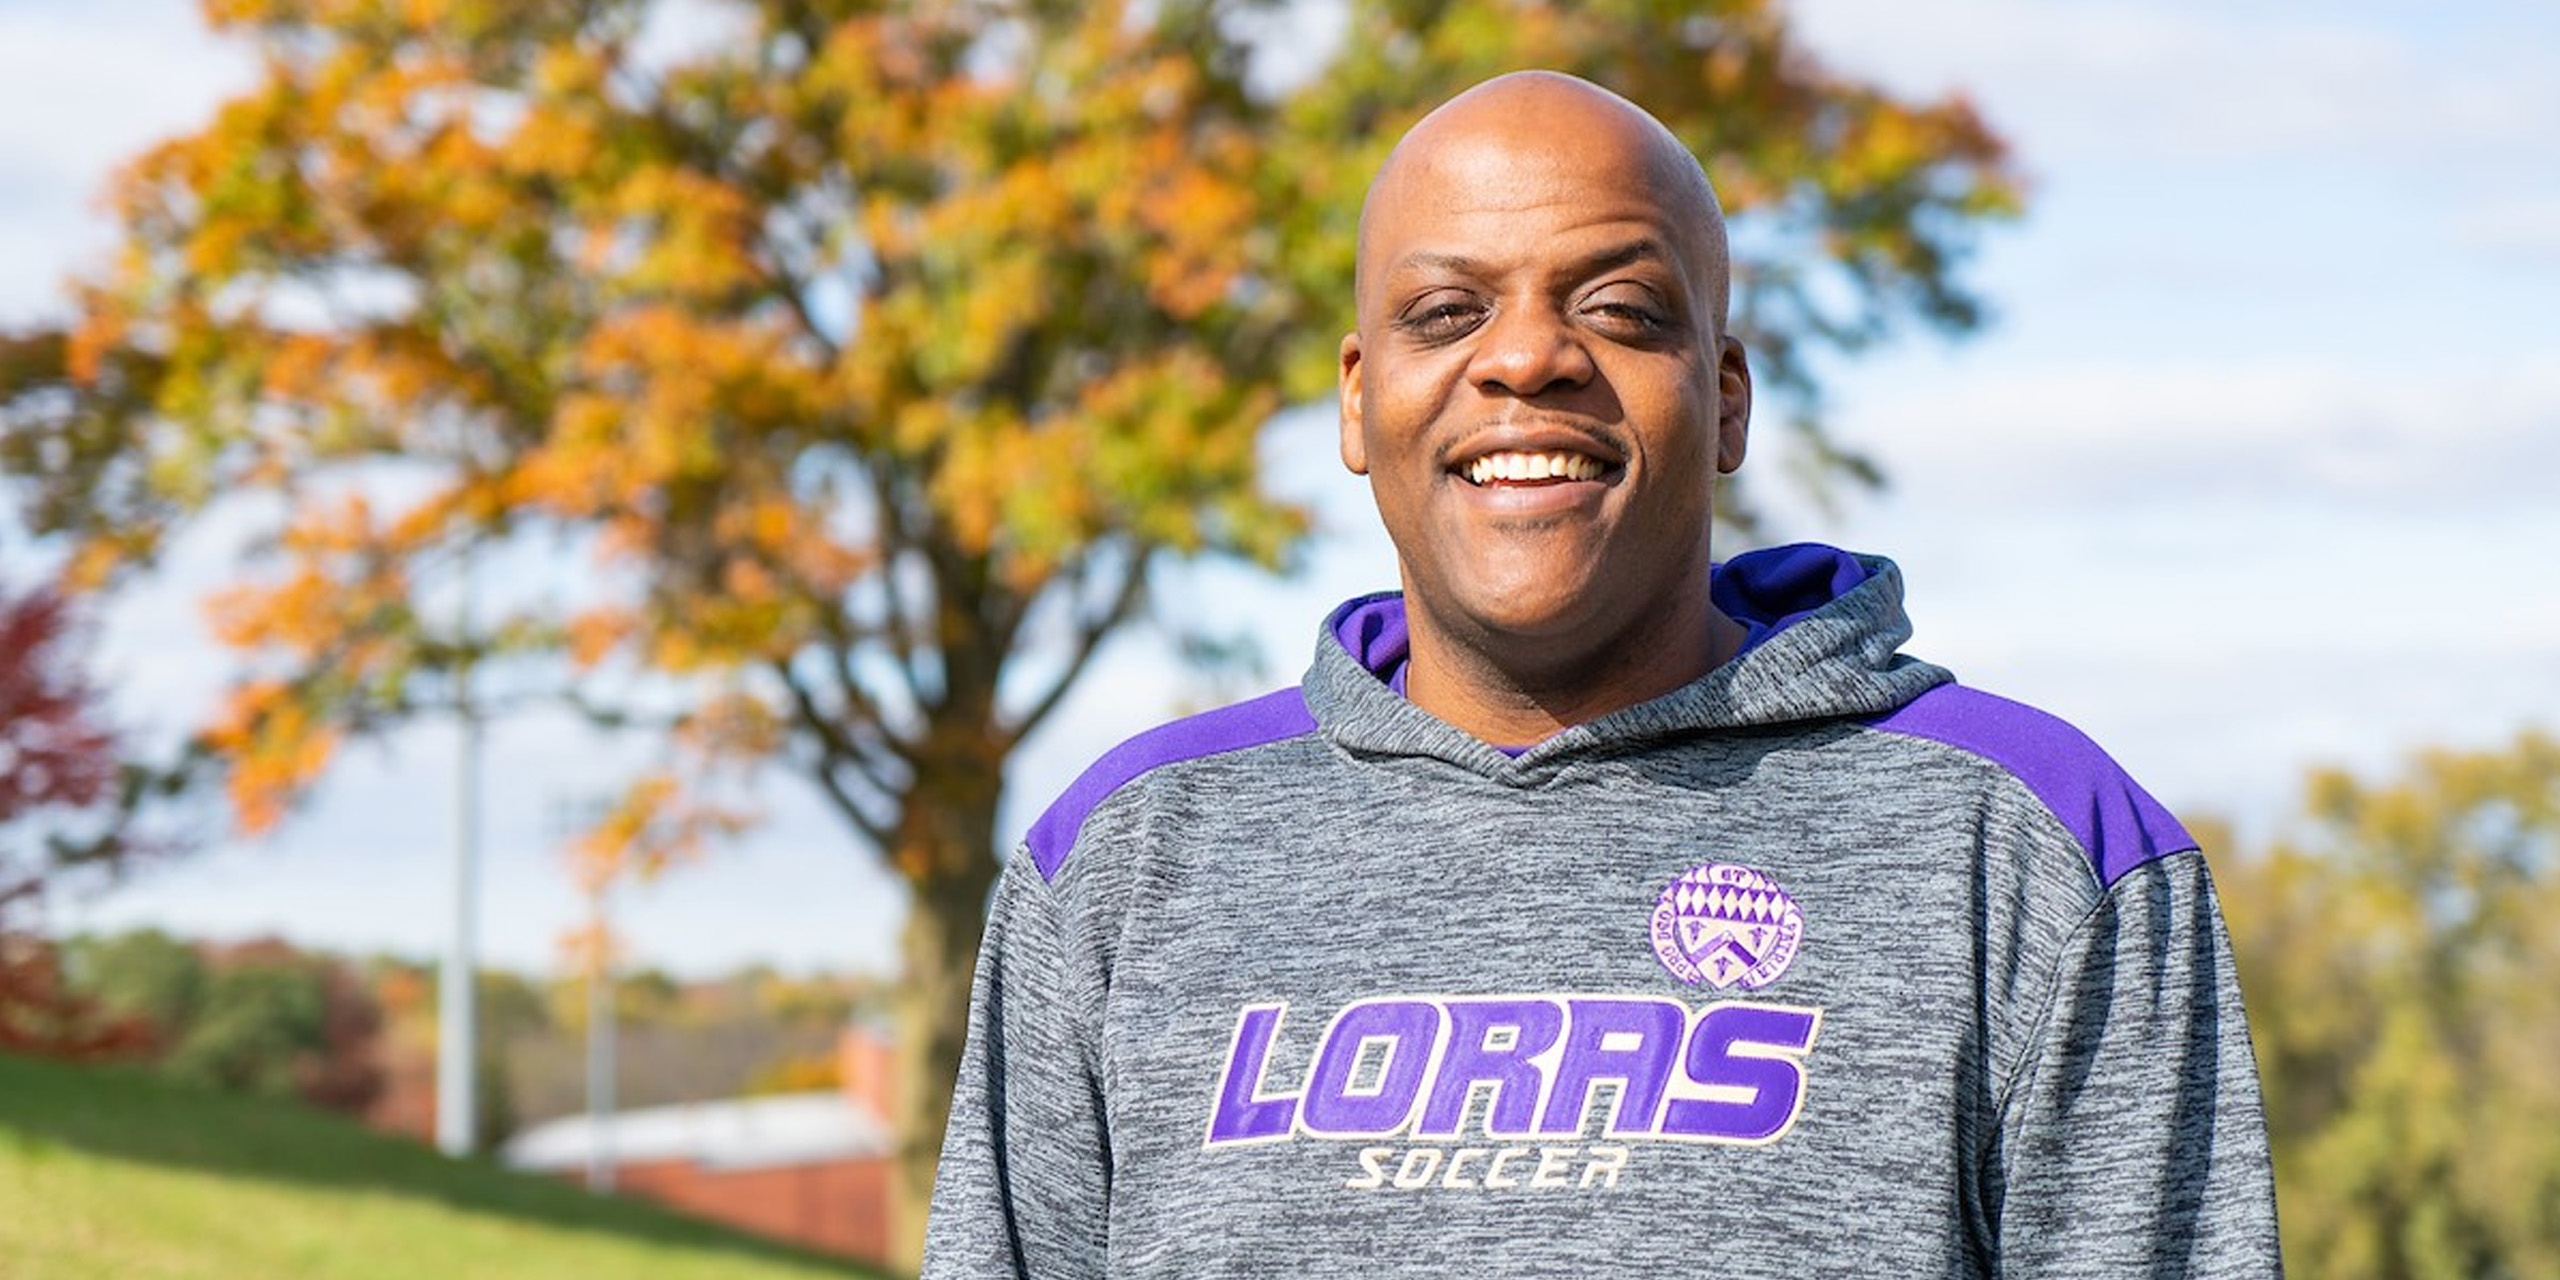 Darrian Hugger, security officer protecting loras college campus